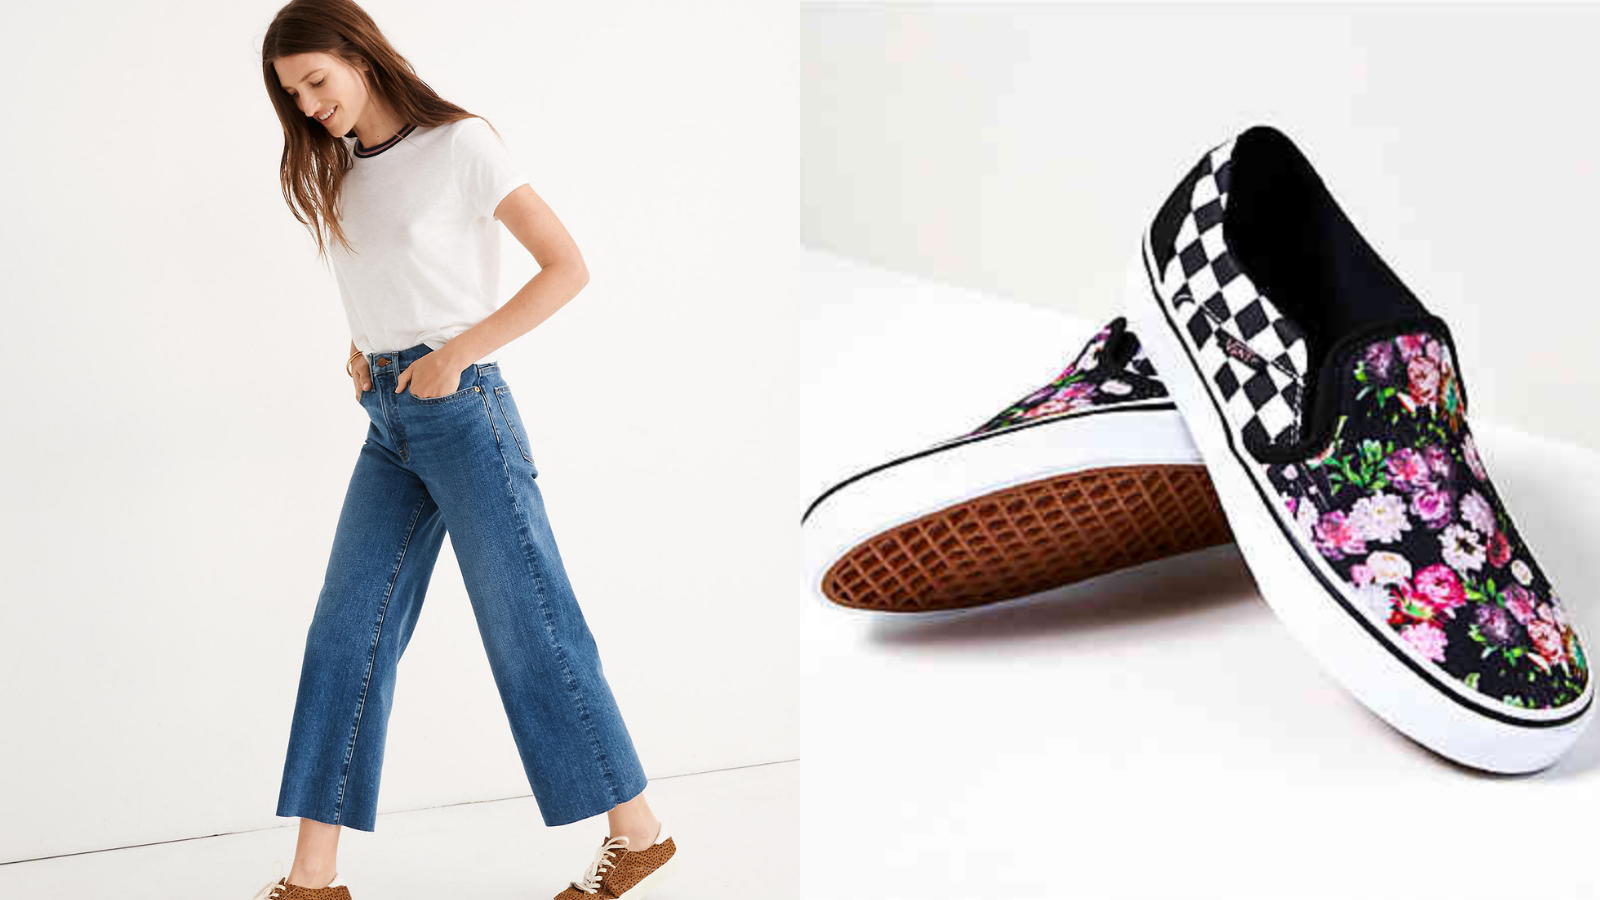 The best clothing, makeup, and fashion deals you can already get